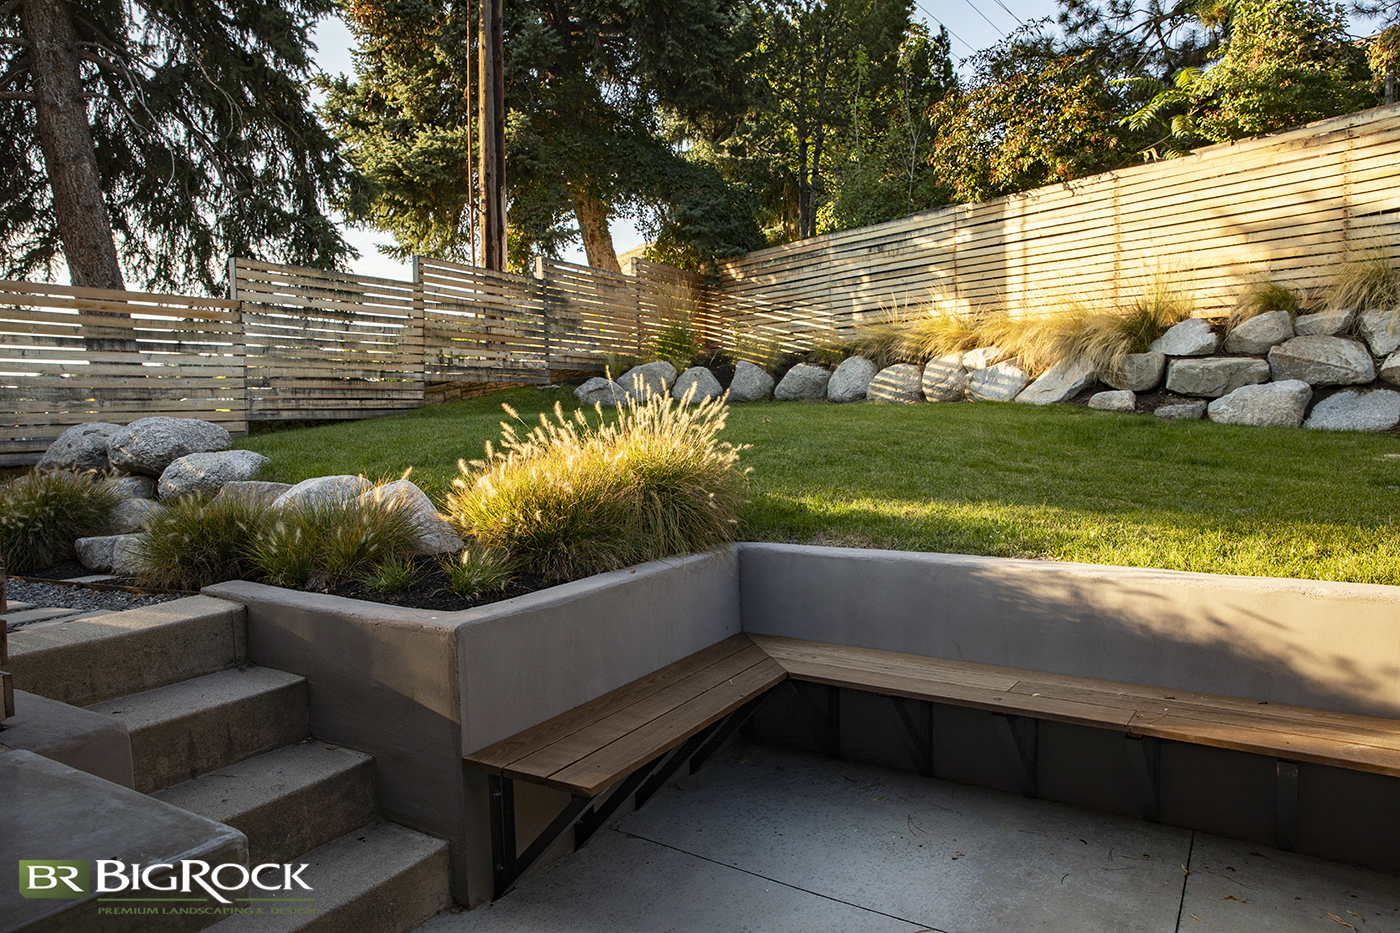 Creating a space for outdoor living adds value to your home and your mood.